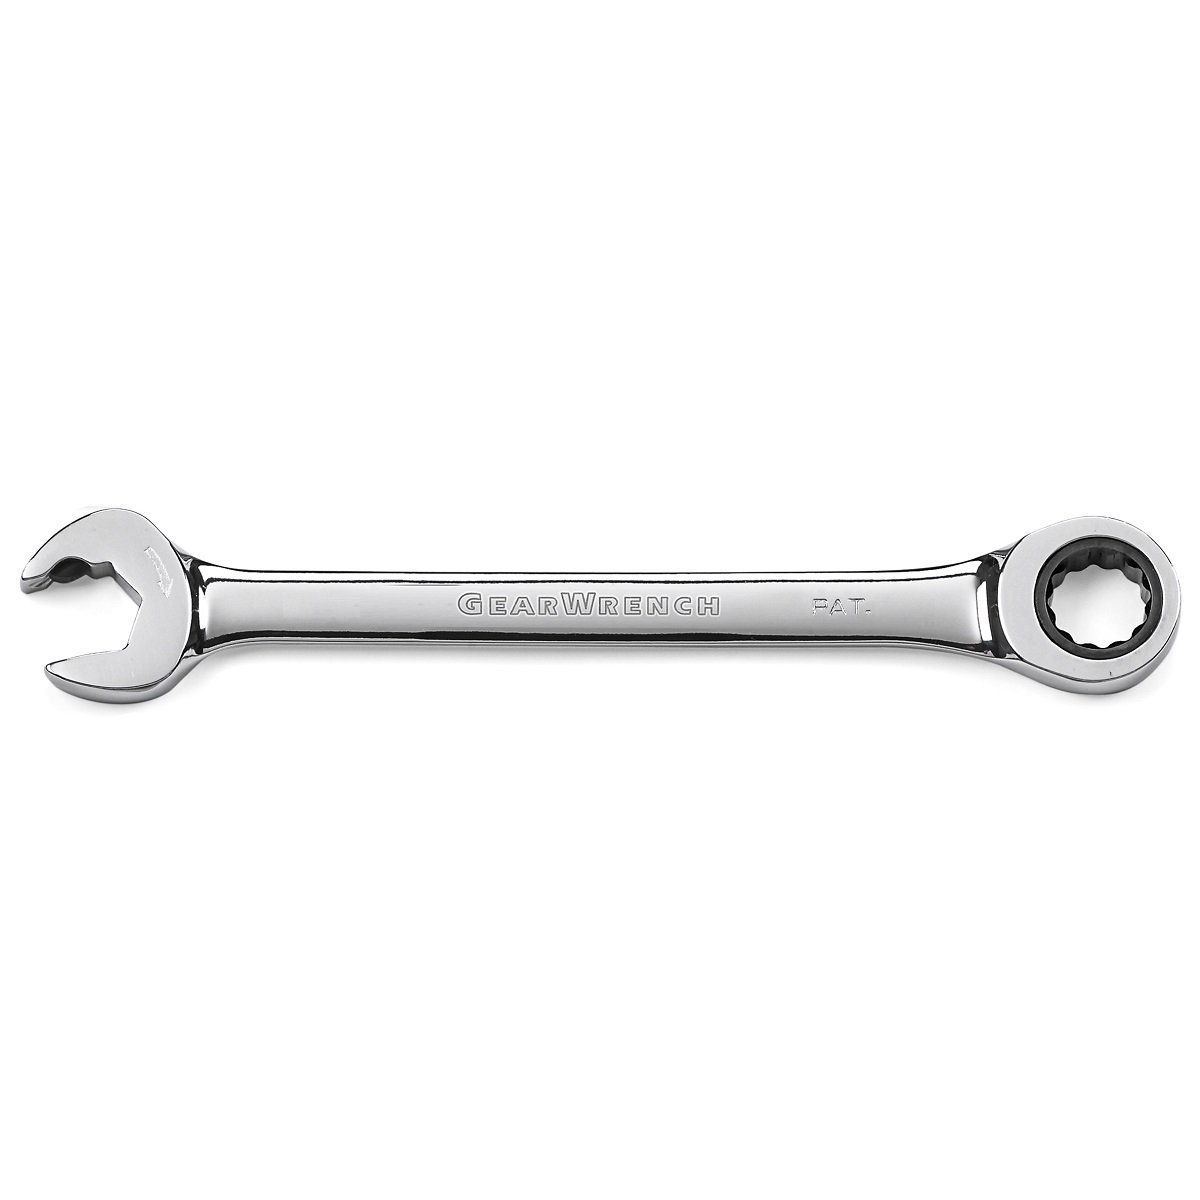 GearWrench Ratcheting Open End Combination Spanner Wrench 19mm 85519